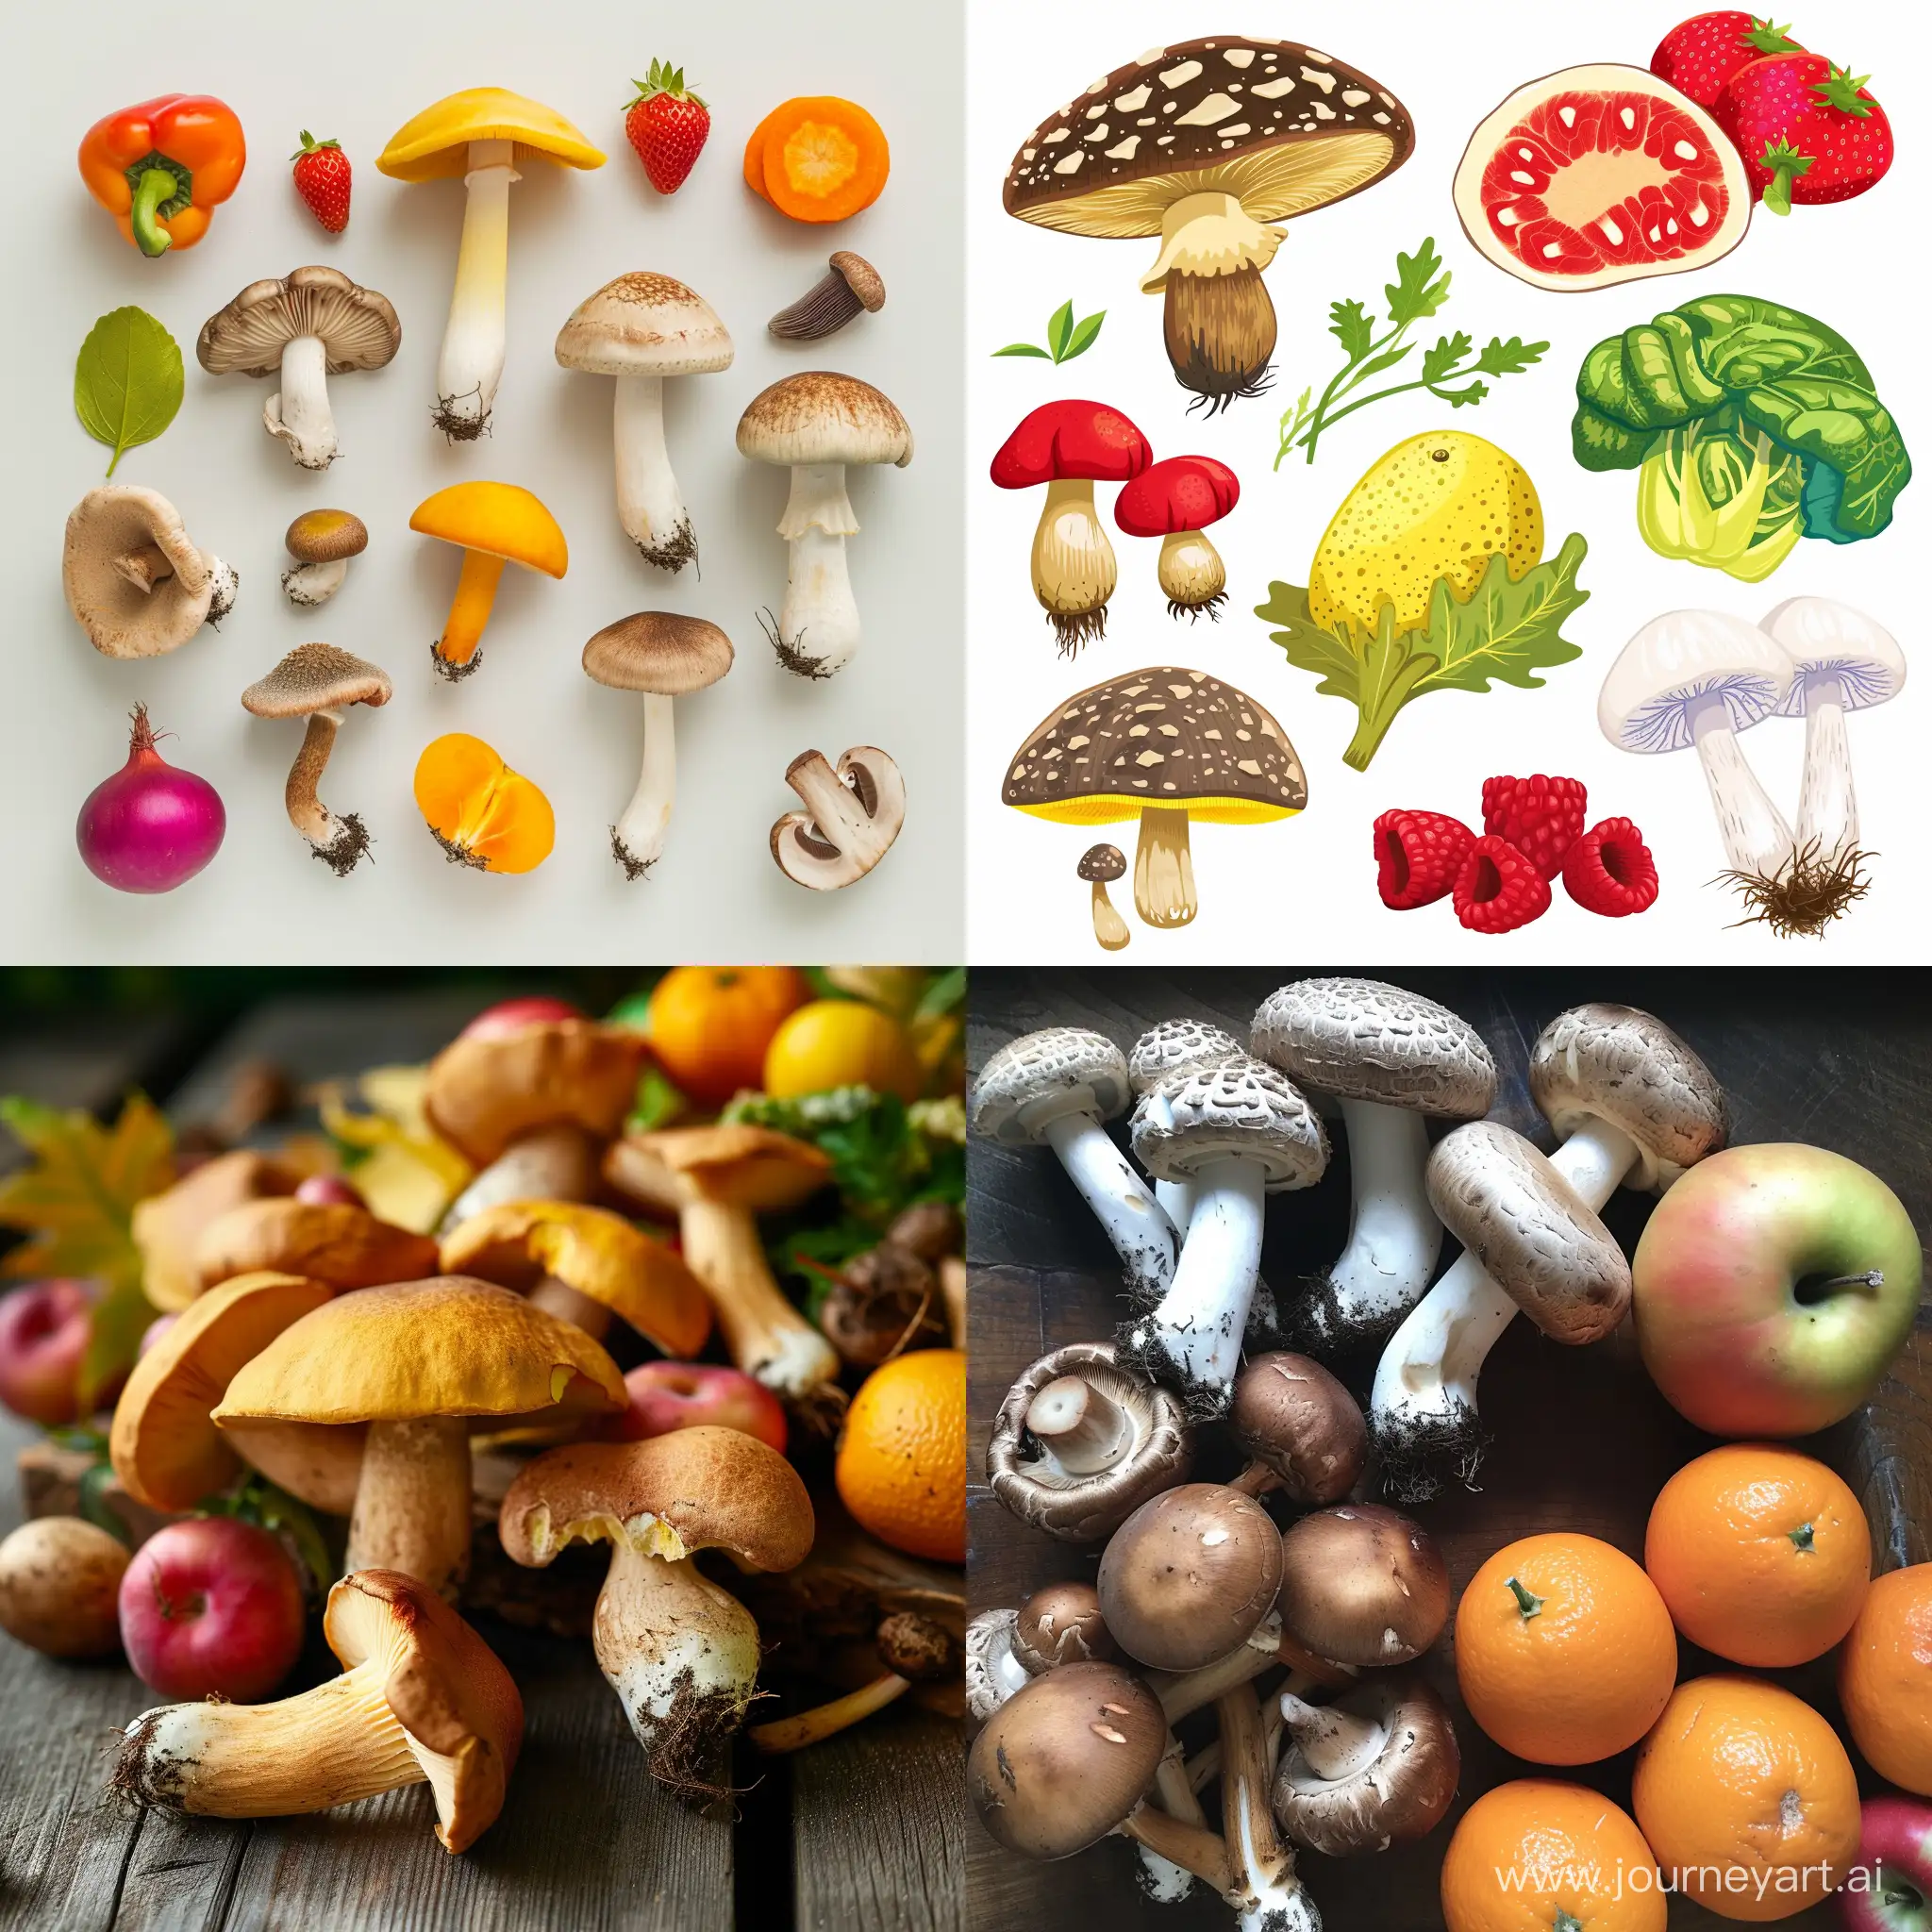 Colorful-Mushroom-Fruit-and-Vegetable-Still-Life-Composition